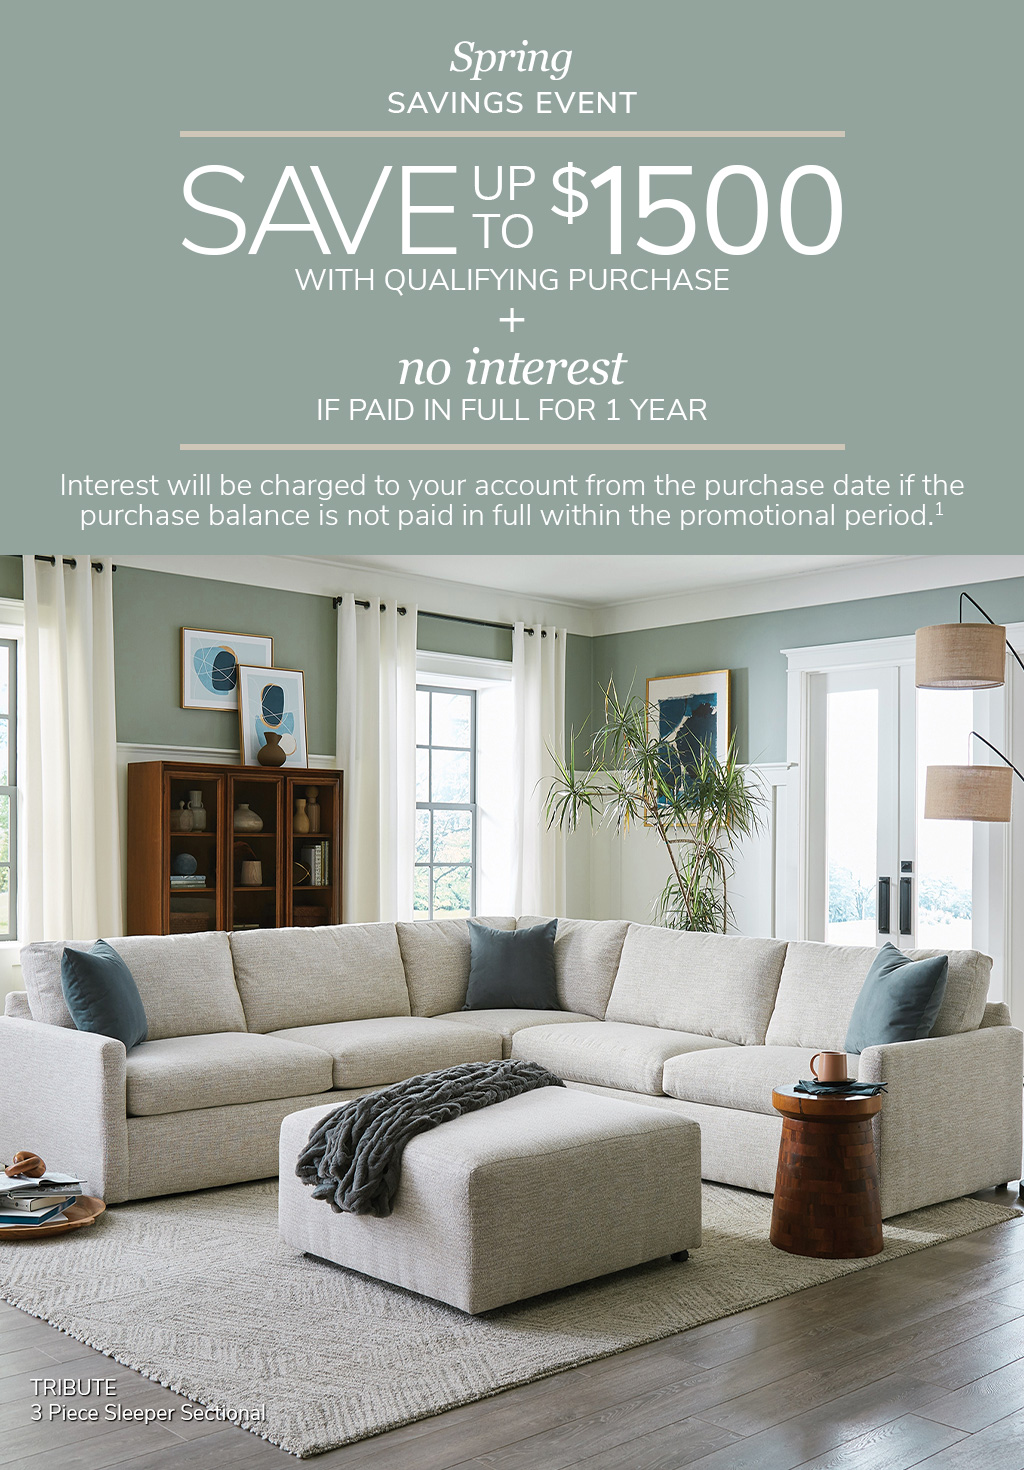 Save up to $1500 + no interest if paid in full for 1 year